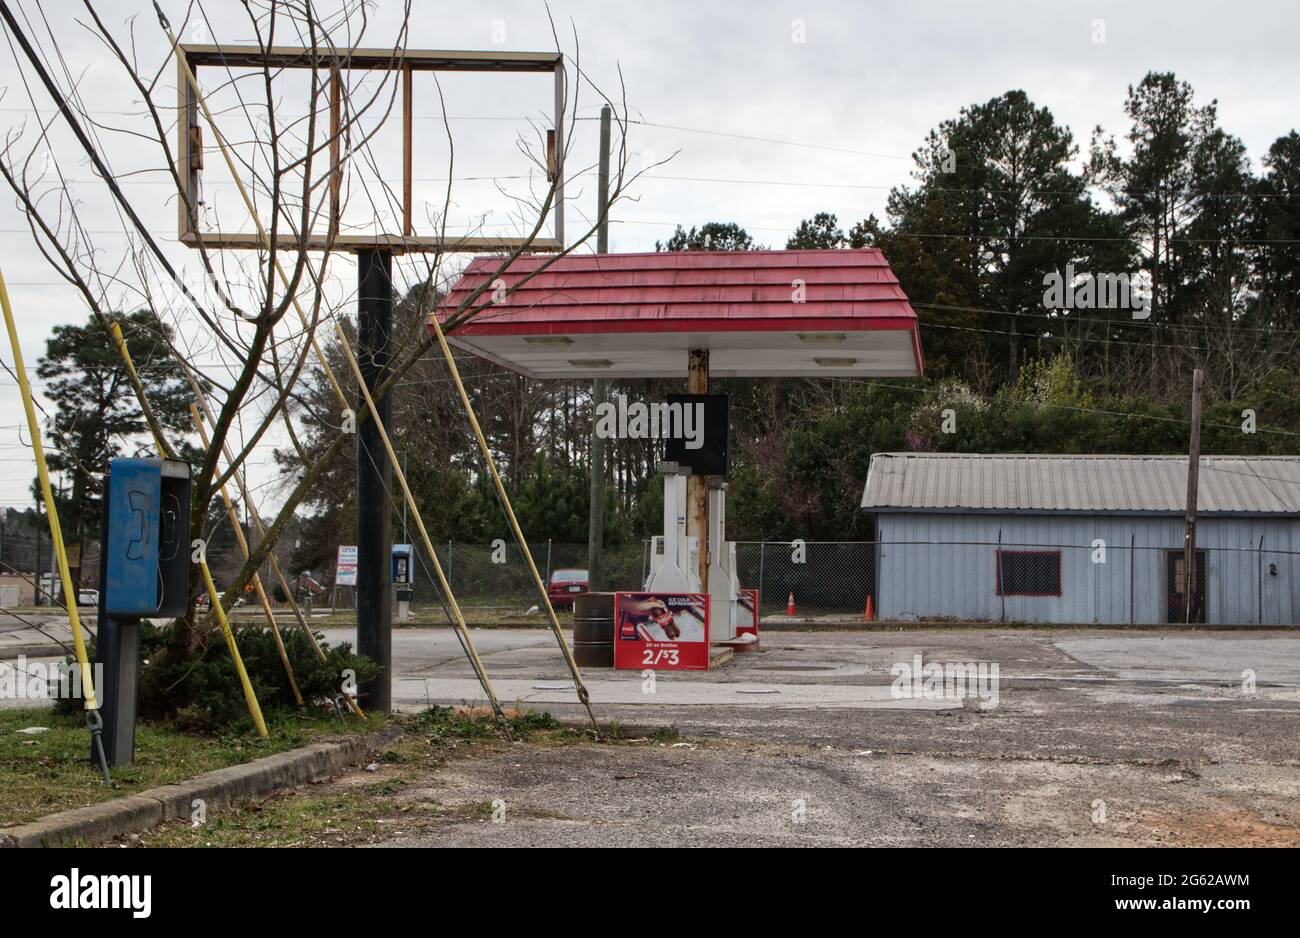 Augusta, Ga USA - 03 06 21: Closed urban gas station and convenience store old vintage blue payphone - Barton Chapel Road Stock Photo